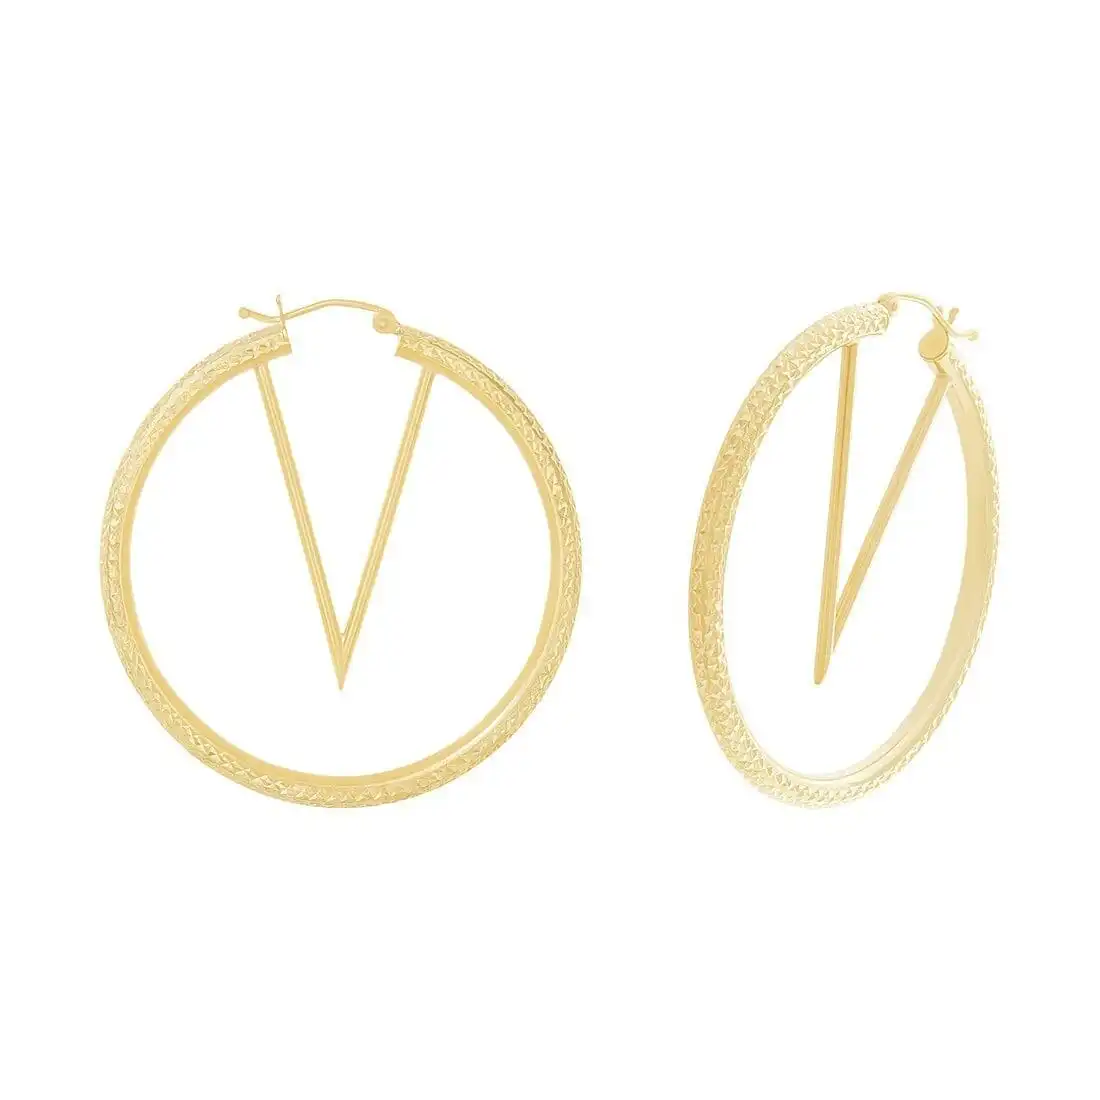 V Shape Centre Hoop Earrings in 9ct Yellow Gold Silver Infused 55mm